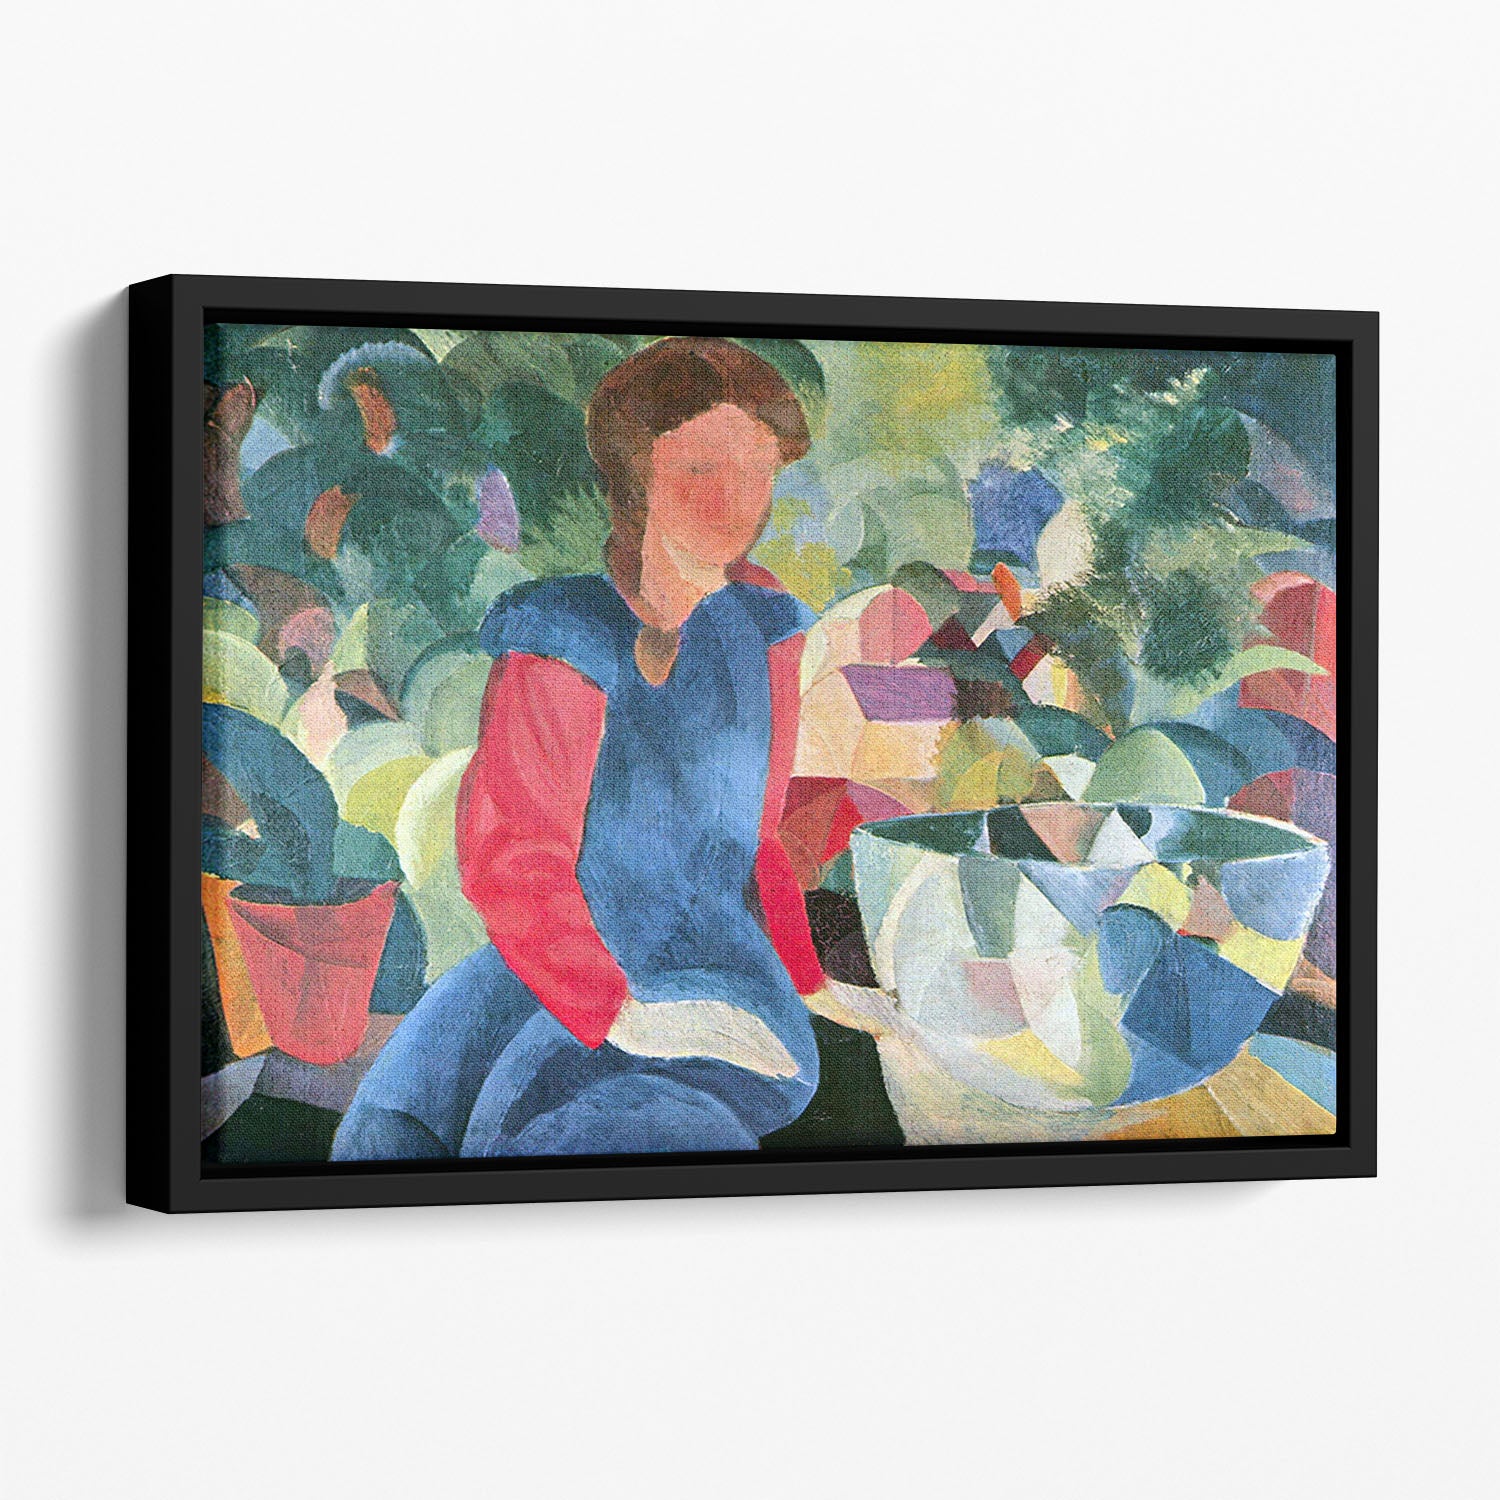 Girls with fish bell by Macke Floating Framed Canvas - Canvas Art Rocks - 1